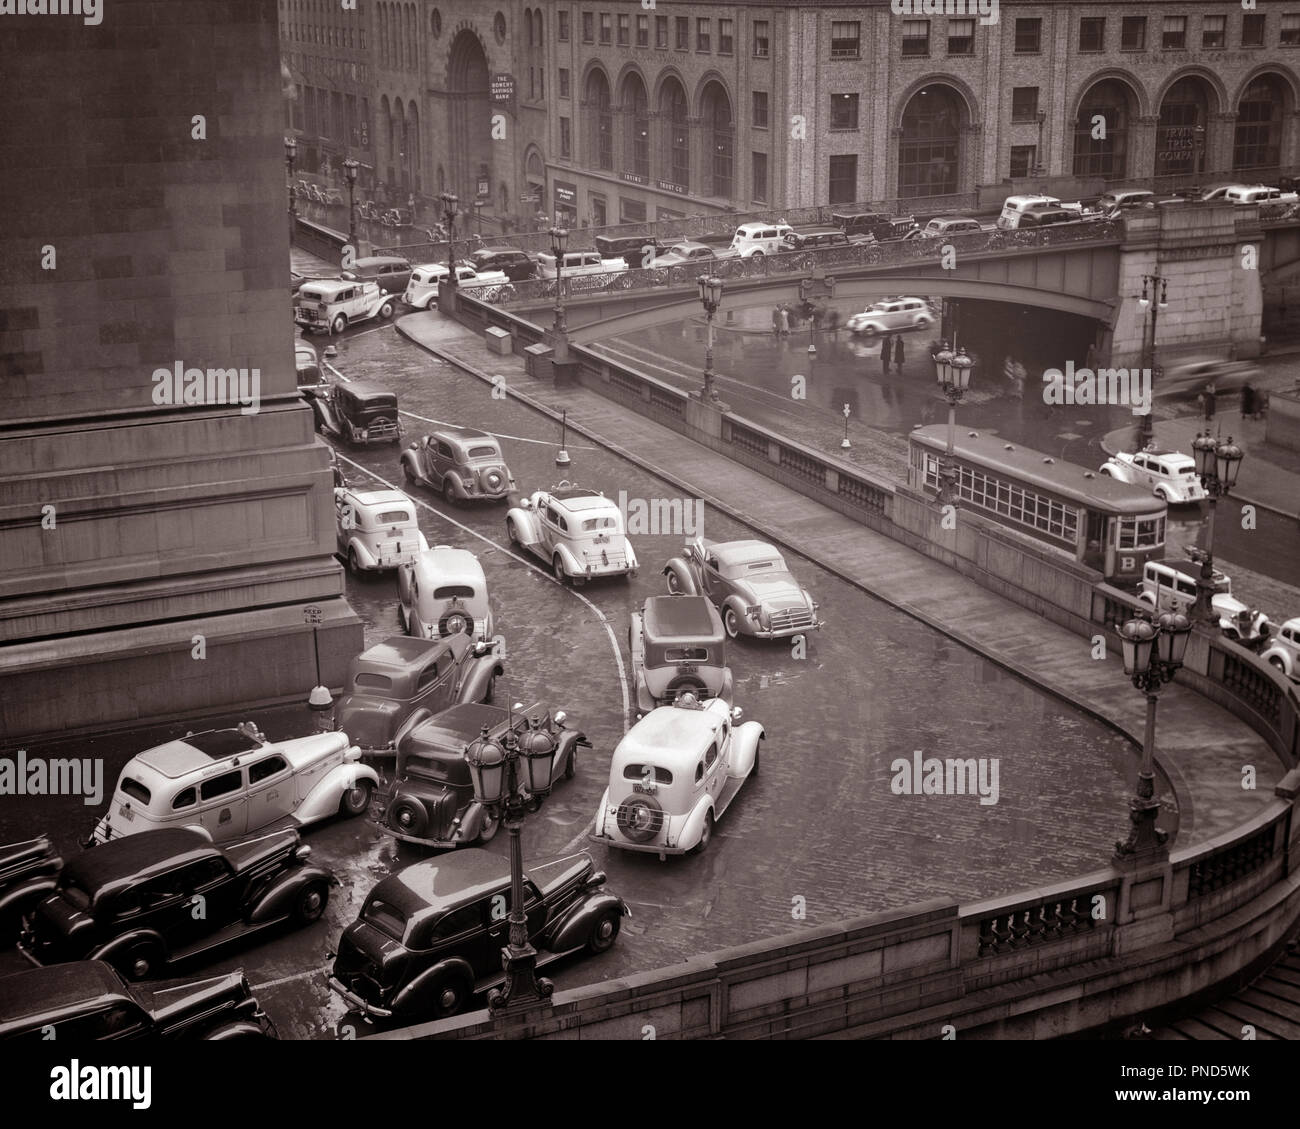 1930s RAINY DAY TRAFFIC JAM AROUND GRAND CENTRAL STATION AT PERSHING SQUARE AND 42ND STREET MIDTOWN MANHATTAN EASTSIDE NYC USA - q37701 CPC001 HARS AND AUTOS EXTERIOR PROGRESS DIRECTION AT NYC GRAND CENTRAL MOTION BLUR CONCEPTUAL NEW YORK AUTOMOBILES CITIES VEHICLES EASTSIDE NEW YORK CITY ROUNDING PERSHING SQUARE CONGESTION TAXIS 42ND STREET BLACK AND WHITE CABS OLD FASHIONED OVERPASS STREET CAR TROLLY Stock Photo